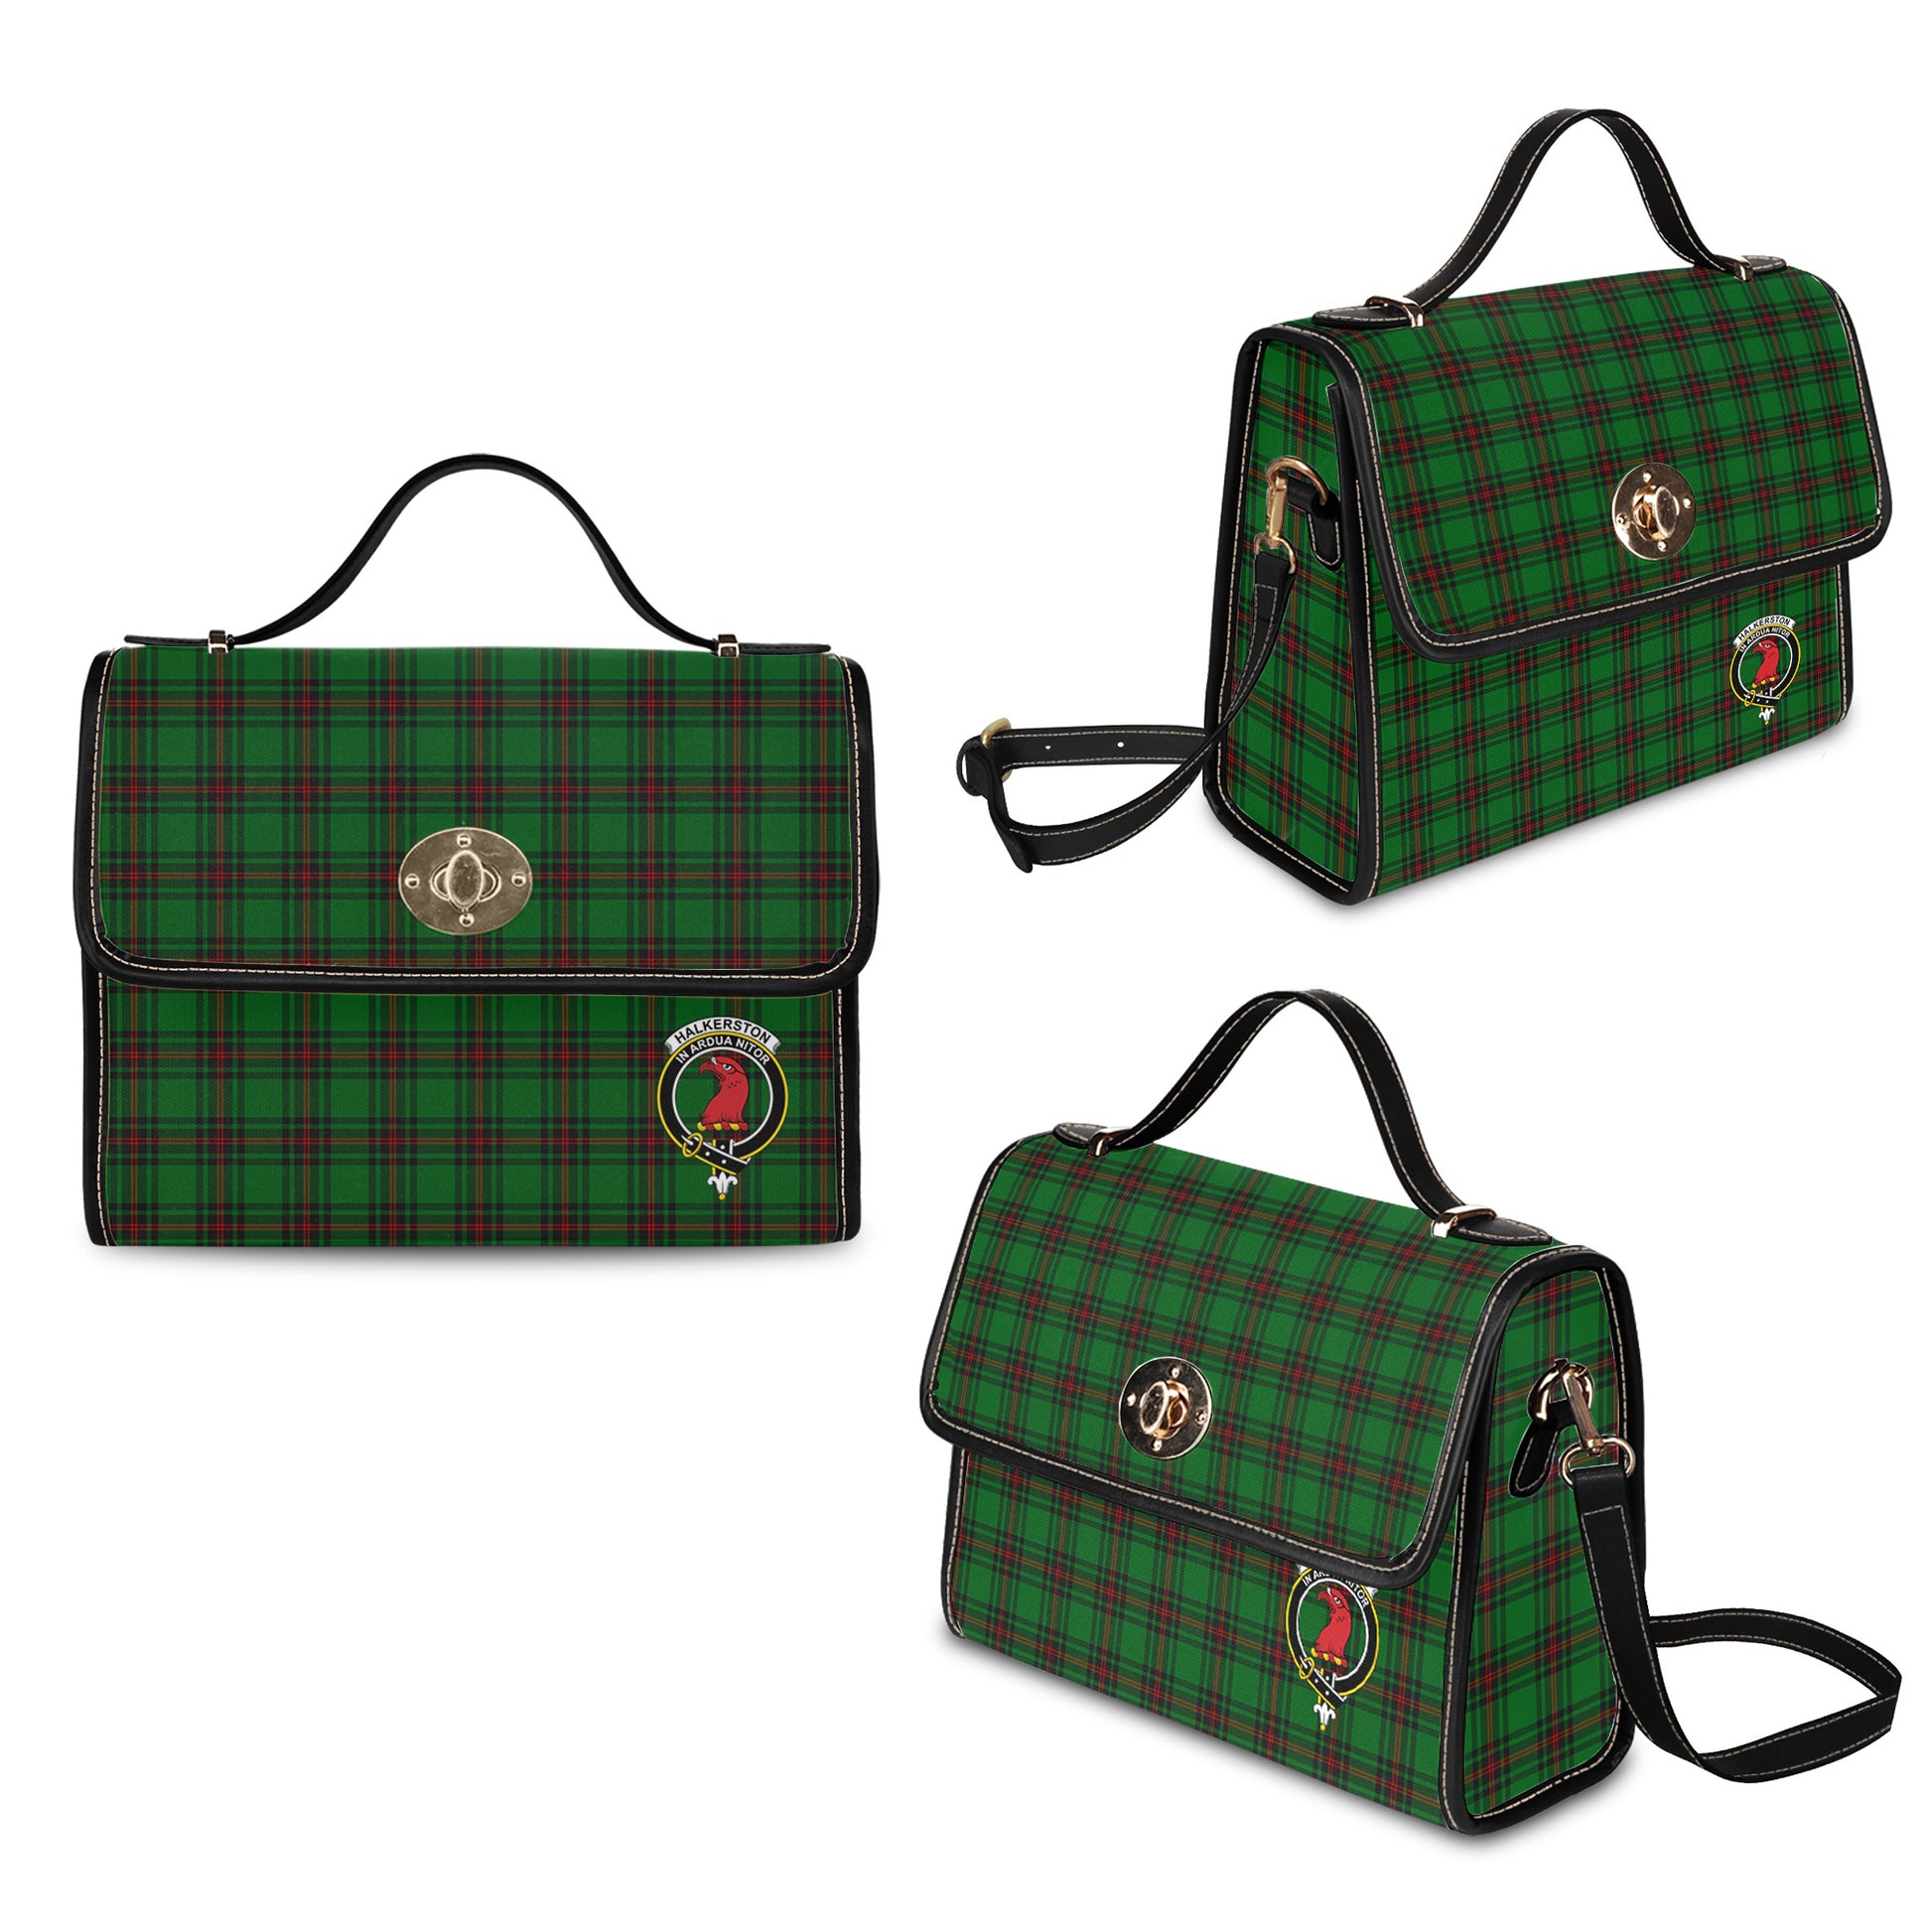 halkerston-tartan-leather-strap-waterproof-canvas-bag-with-family-crest